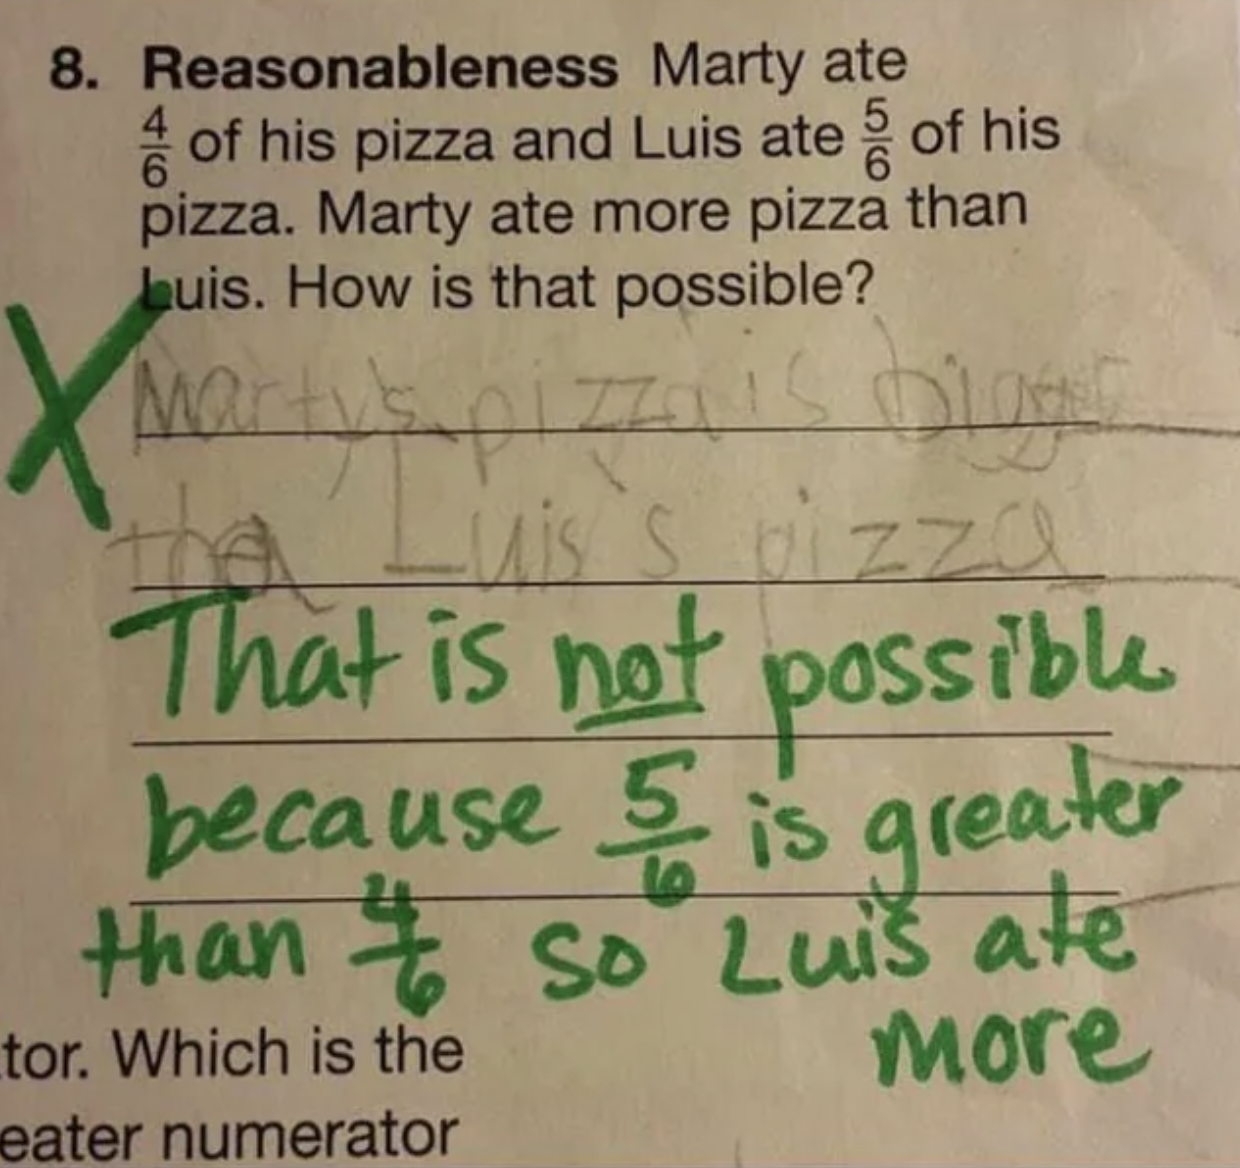 handwriting - 8. Reasonableness Marty ate of his pizza and Luis ate of his pizza. Marty ate more pizza than buis. How is that possible? Marty's pizza is bigg the Luis's pizza That is not possible because 5 is greater than & so Luis ate tor. Which is the m